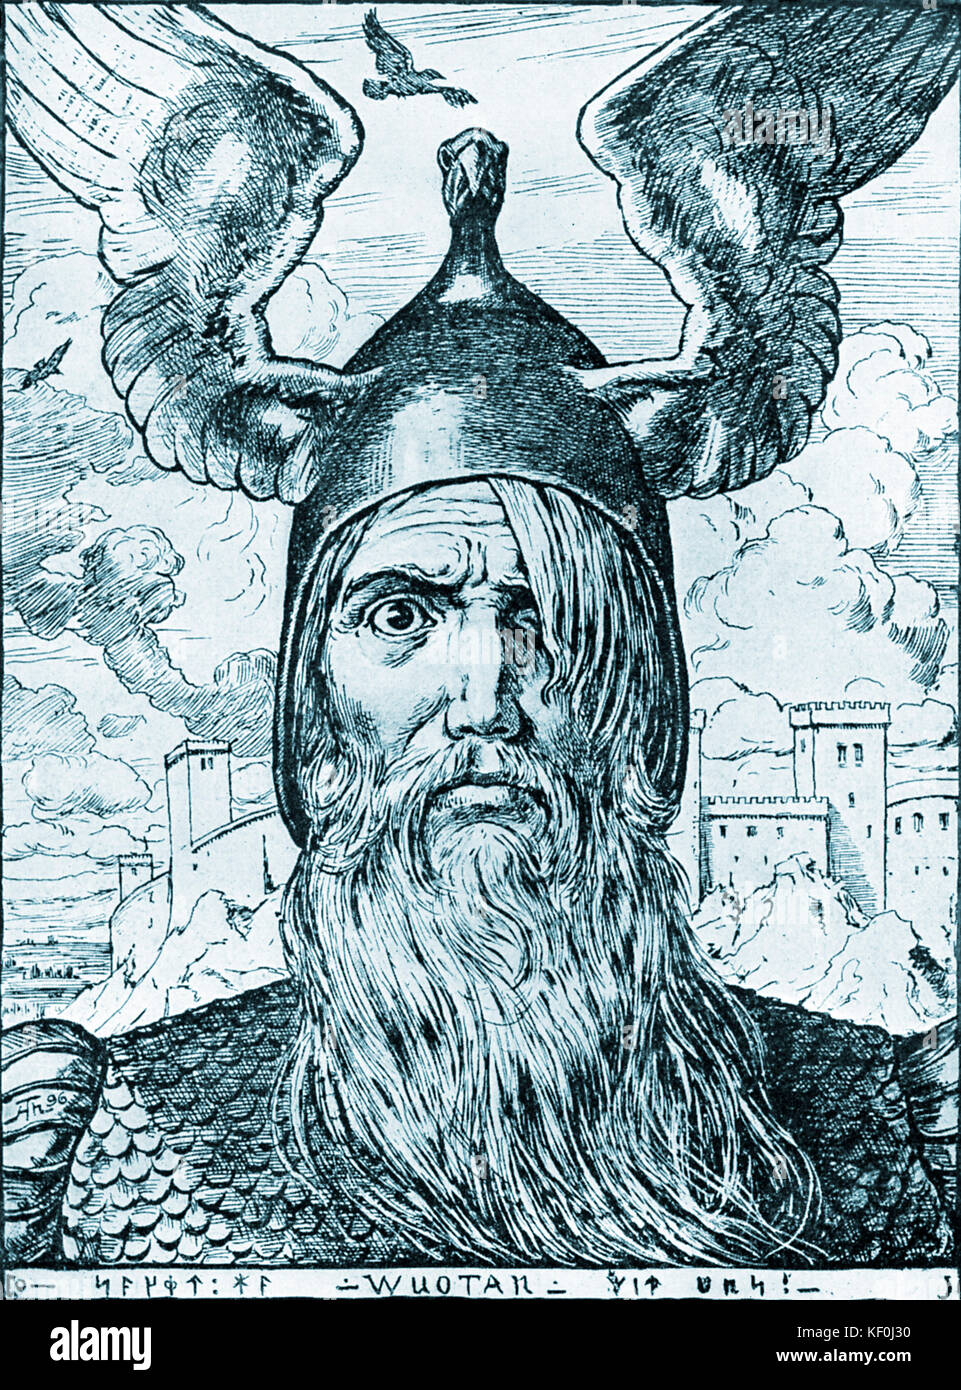 Wotan, king of the Germanic pagan gods and key character in Richard Wagner 's 'Ring Cycle'. From Breitkopd and Härtel 's 'Zeitgenössischen Kunstblättern'.  RW German composer & author, 22 May 1813 - 13 February 1883. Tinted version. Stock Photo